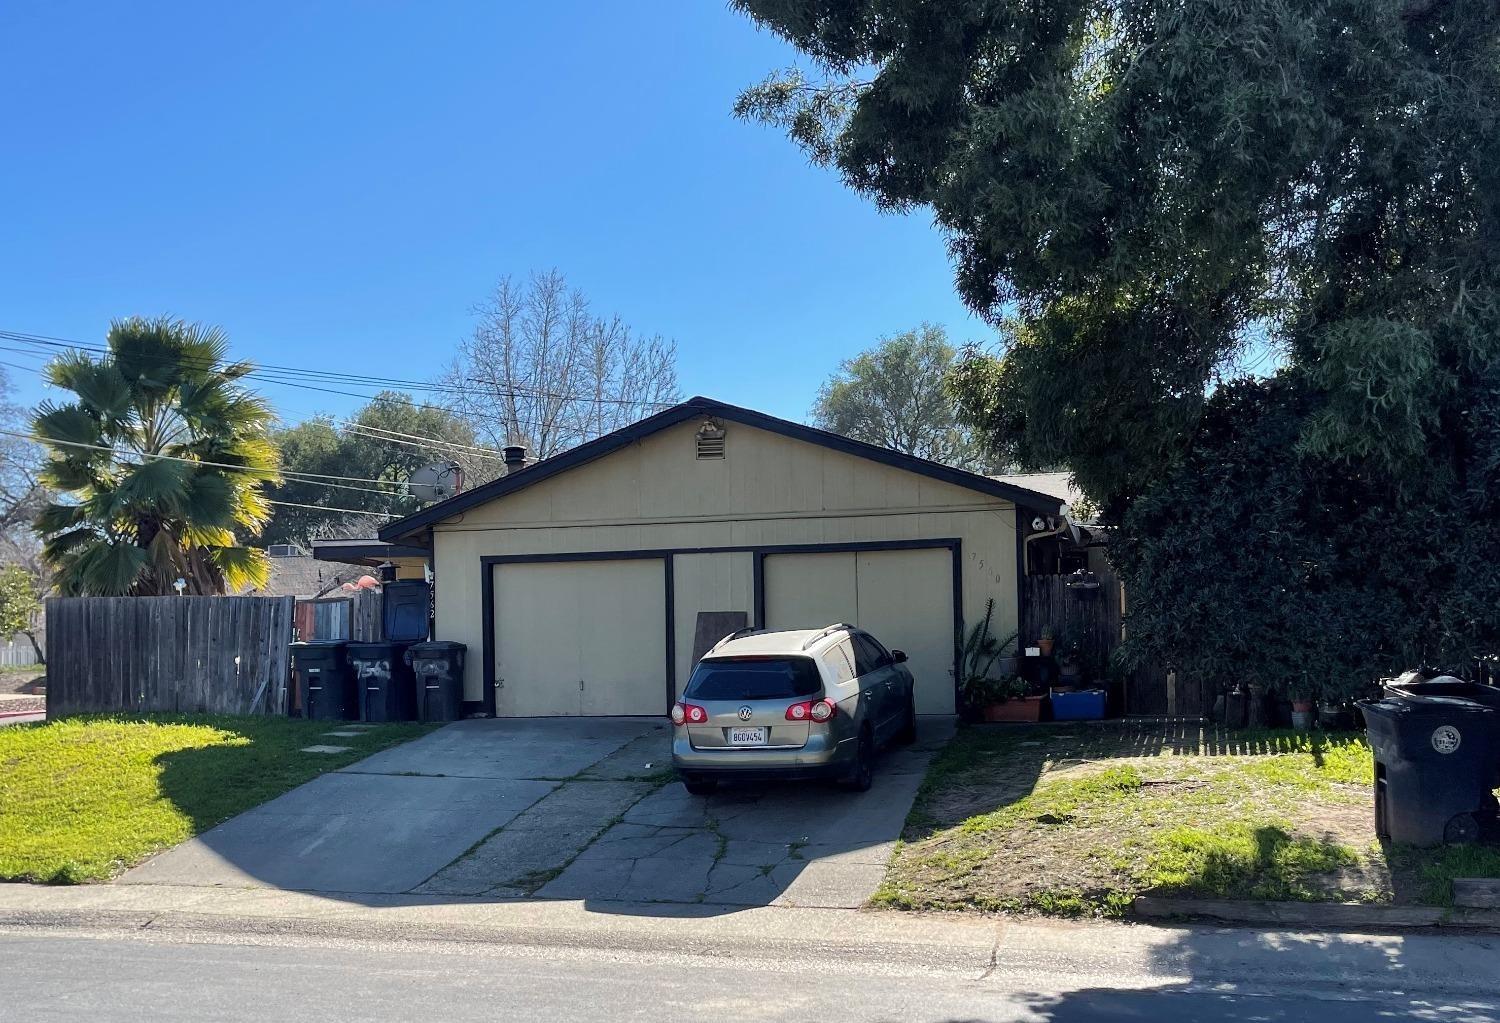 Photo of 7560-7562 Cook Ave in Citrus Heights, CA